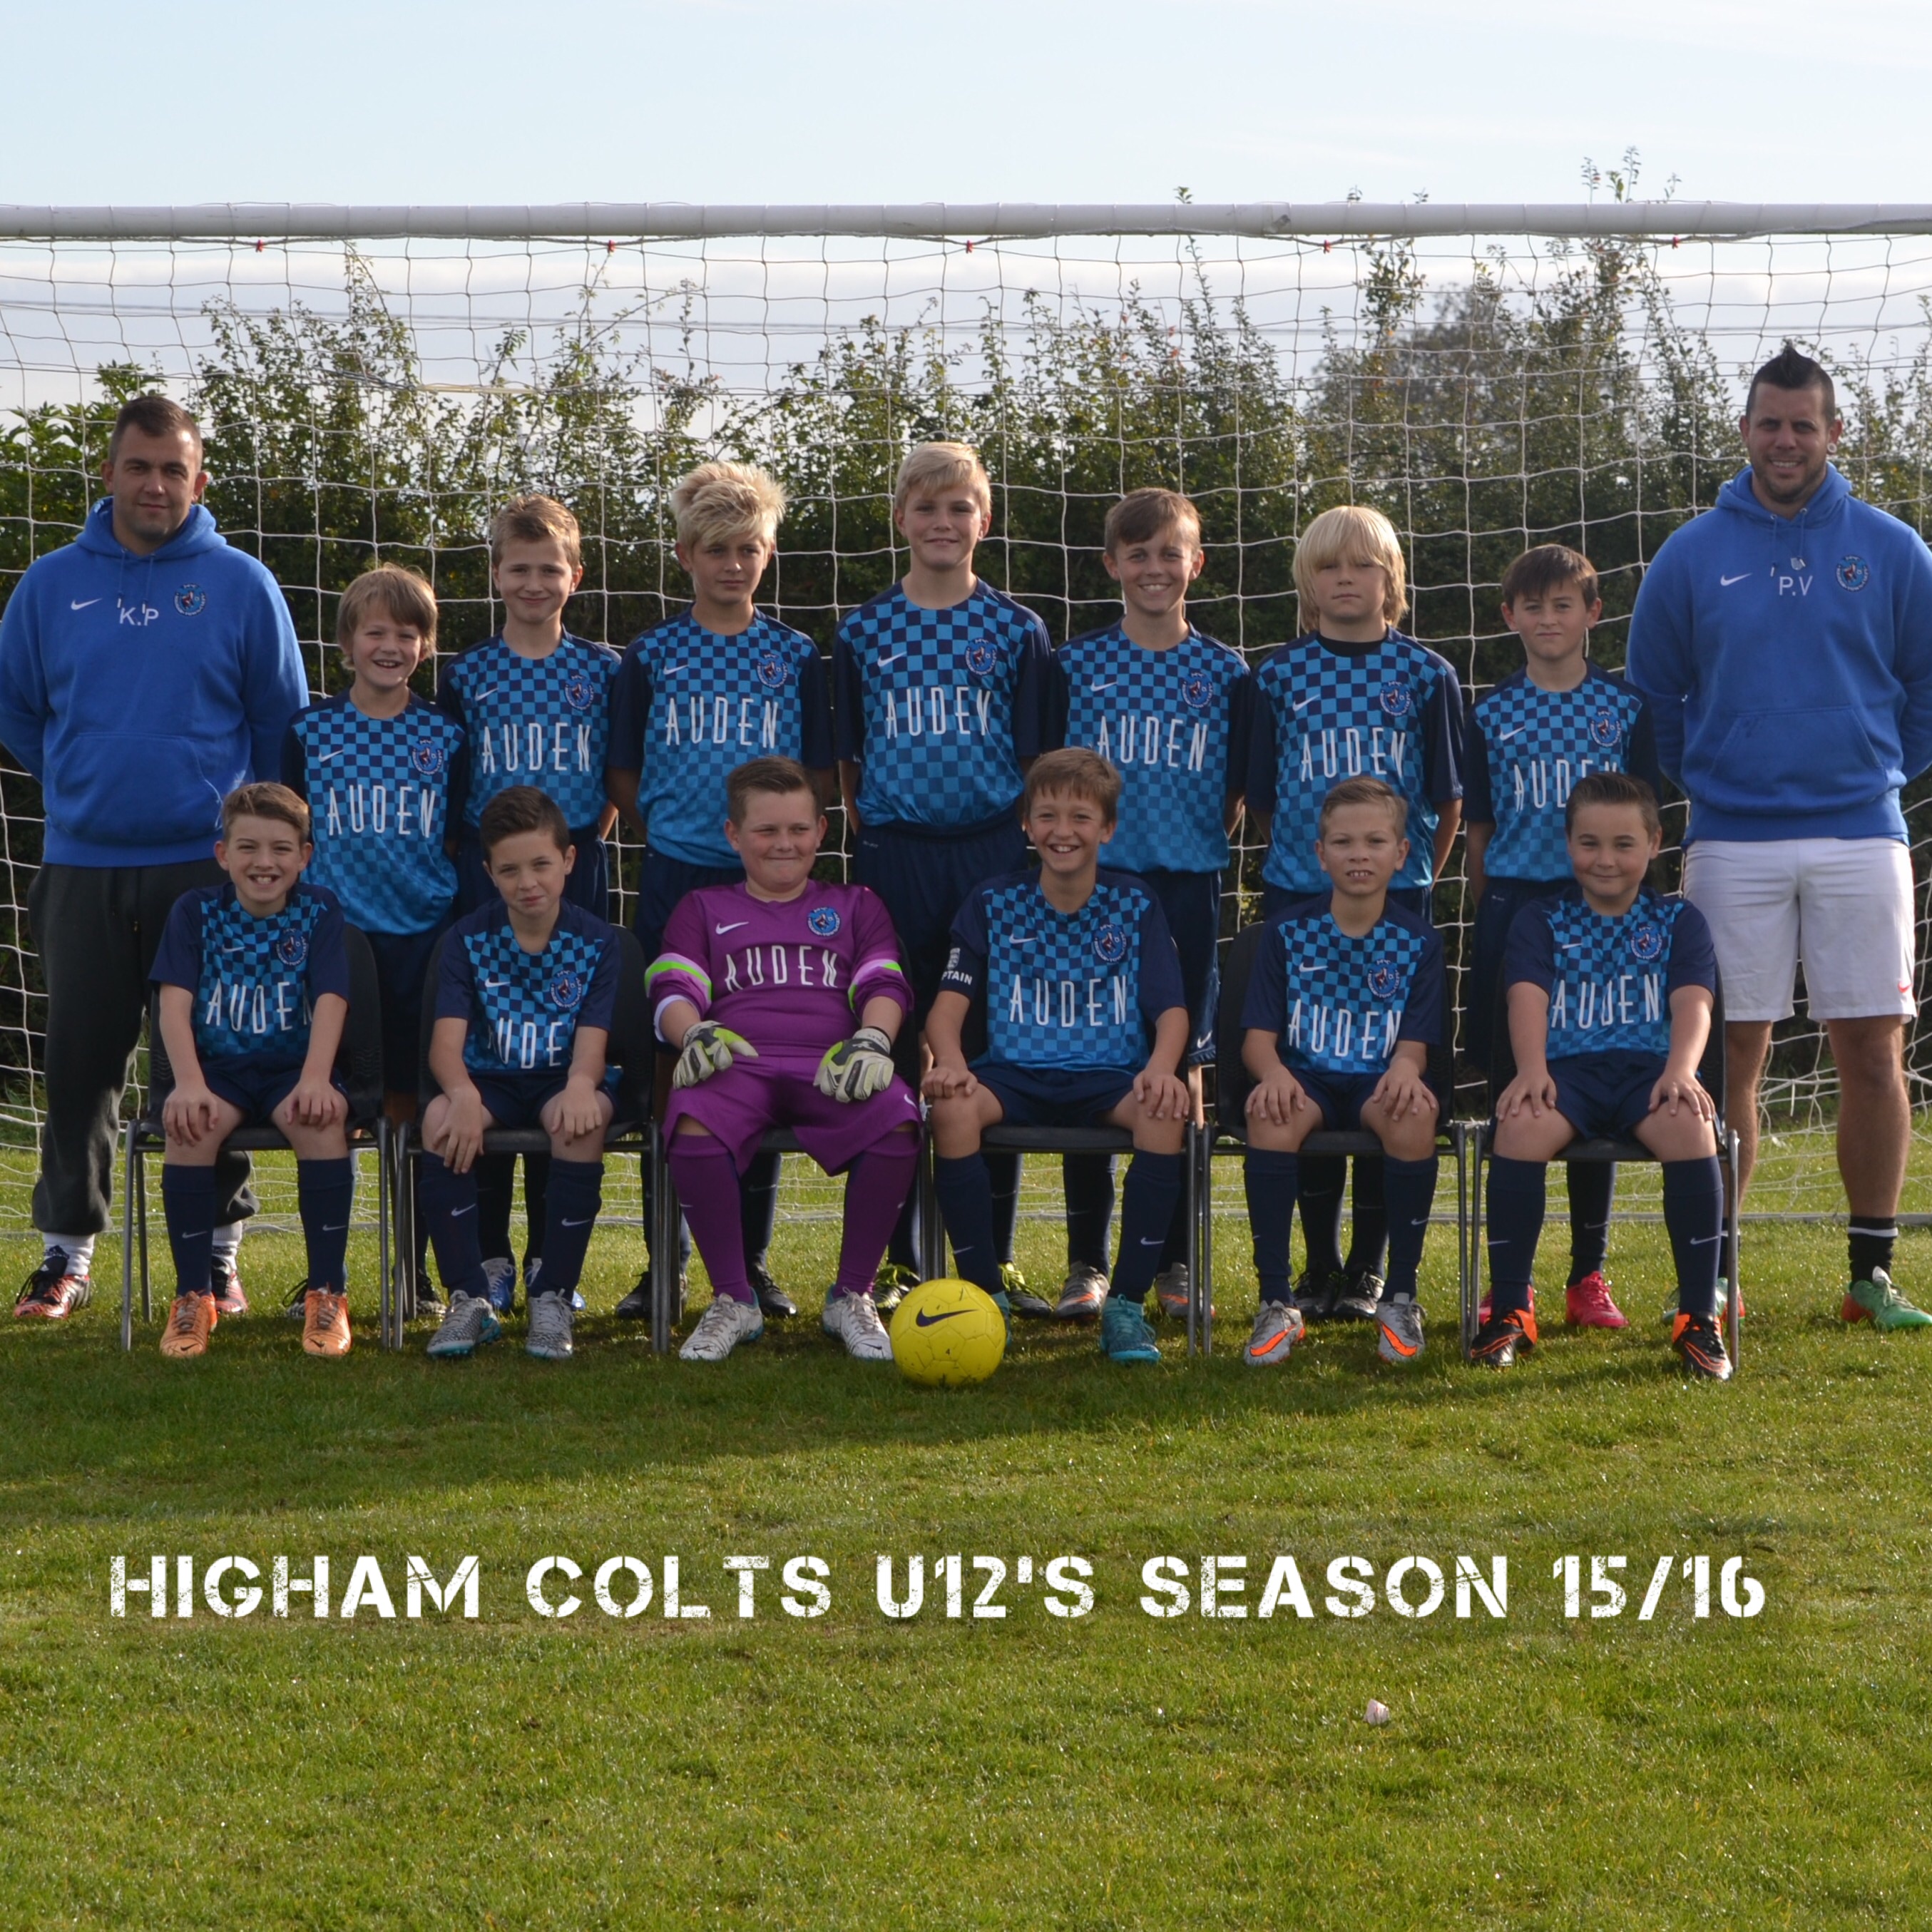 Auden is proud to support local football side Higham colts